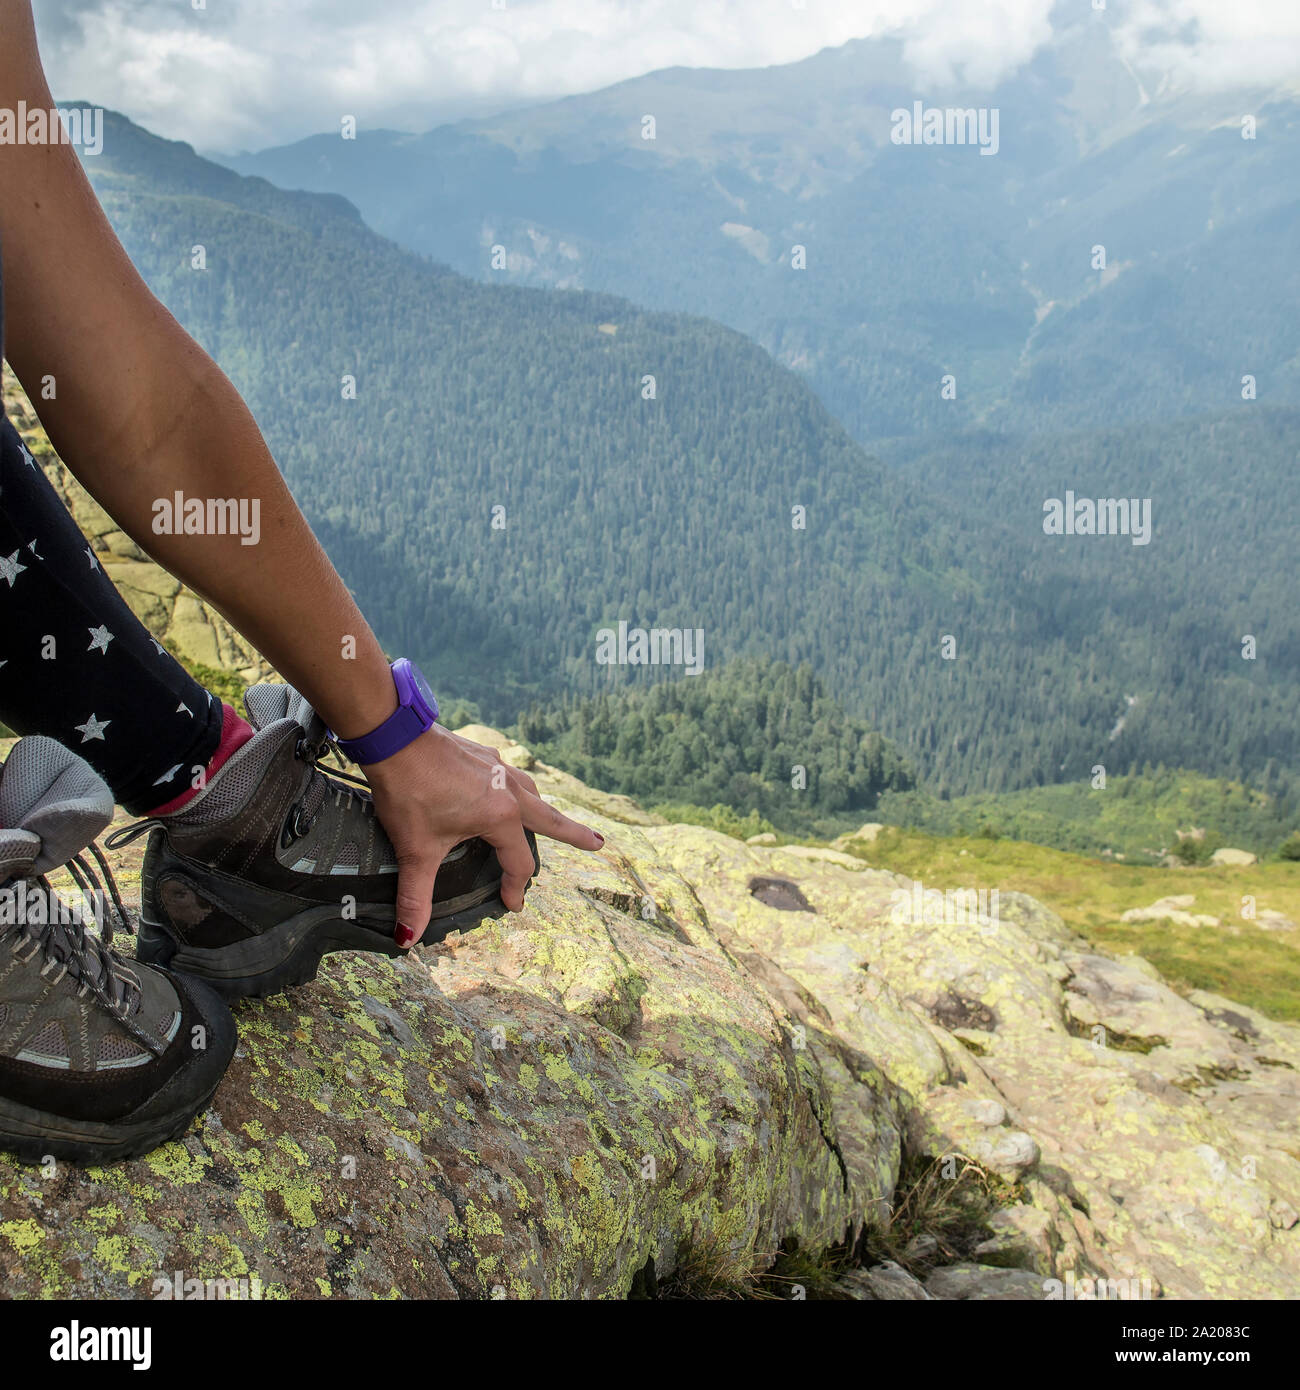 The man in the mountains showing his hand to unstick sole from hiking boots Stock Photo